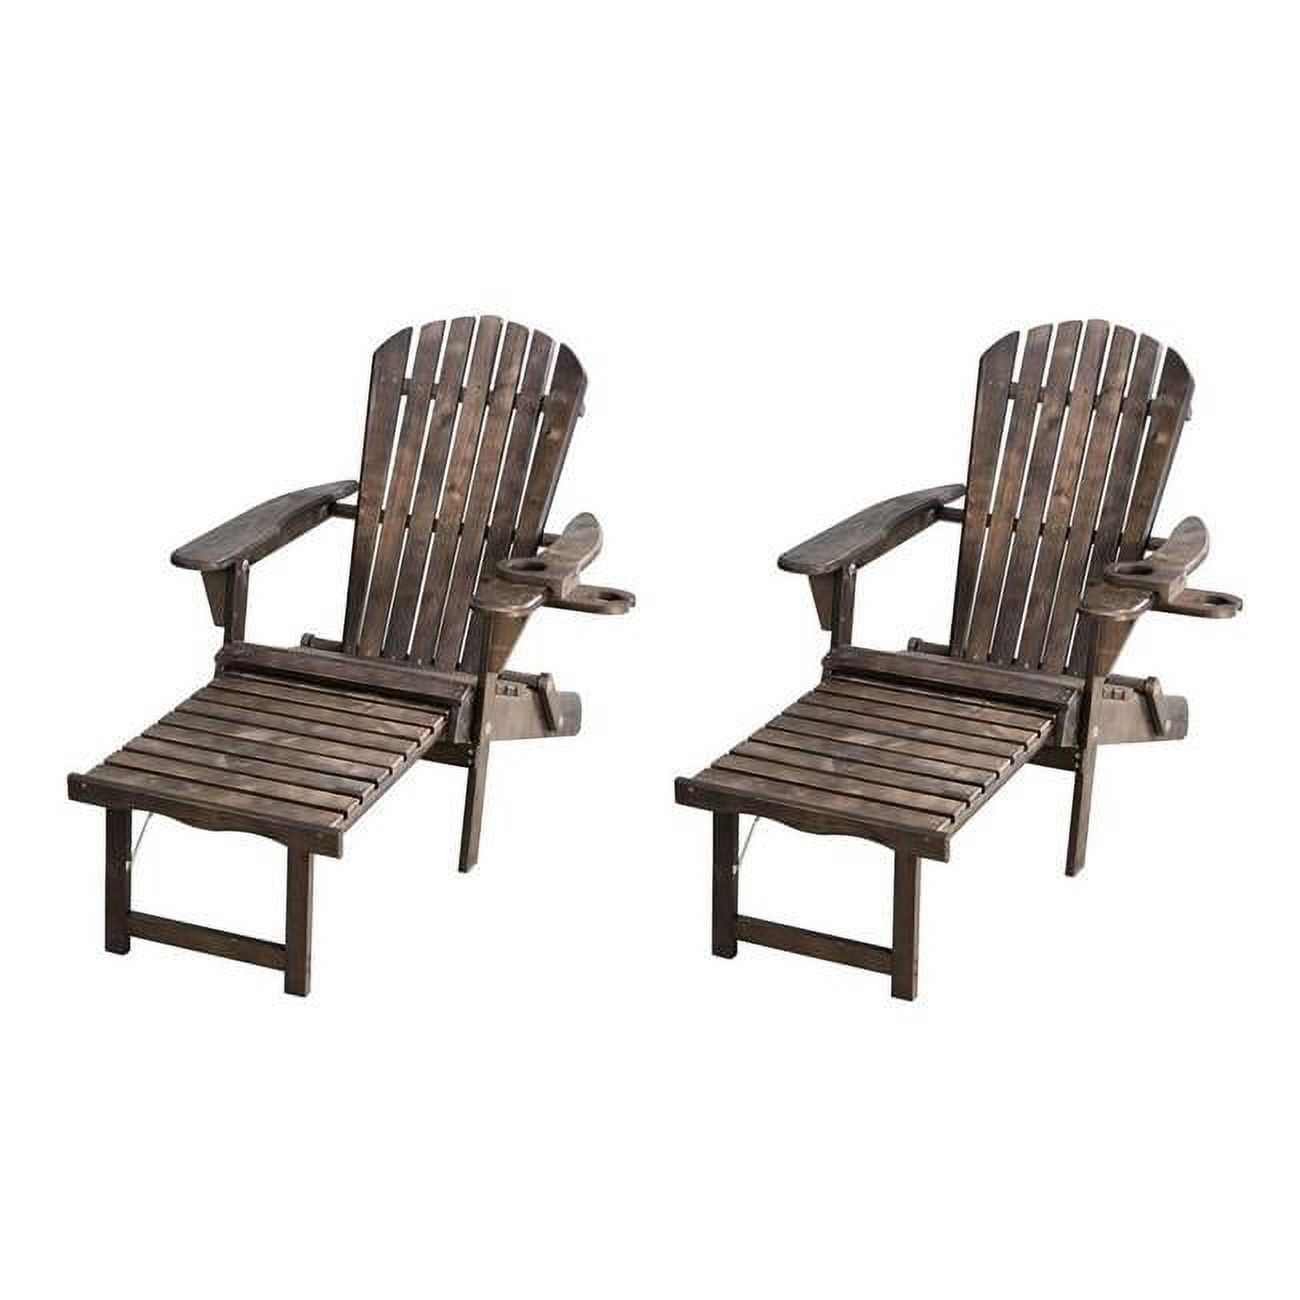 W Home  70 in. Oceanic Collection Adirondack Chaise Lounge Chair Foldable, Cup & Glass Holder, Dark Brown - Set of 2 - image 1 of 2